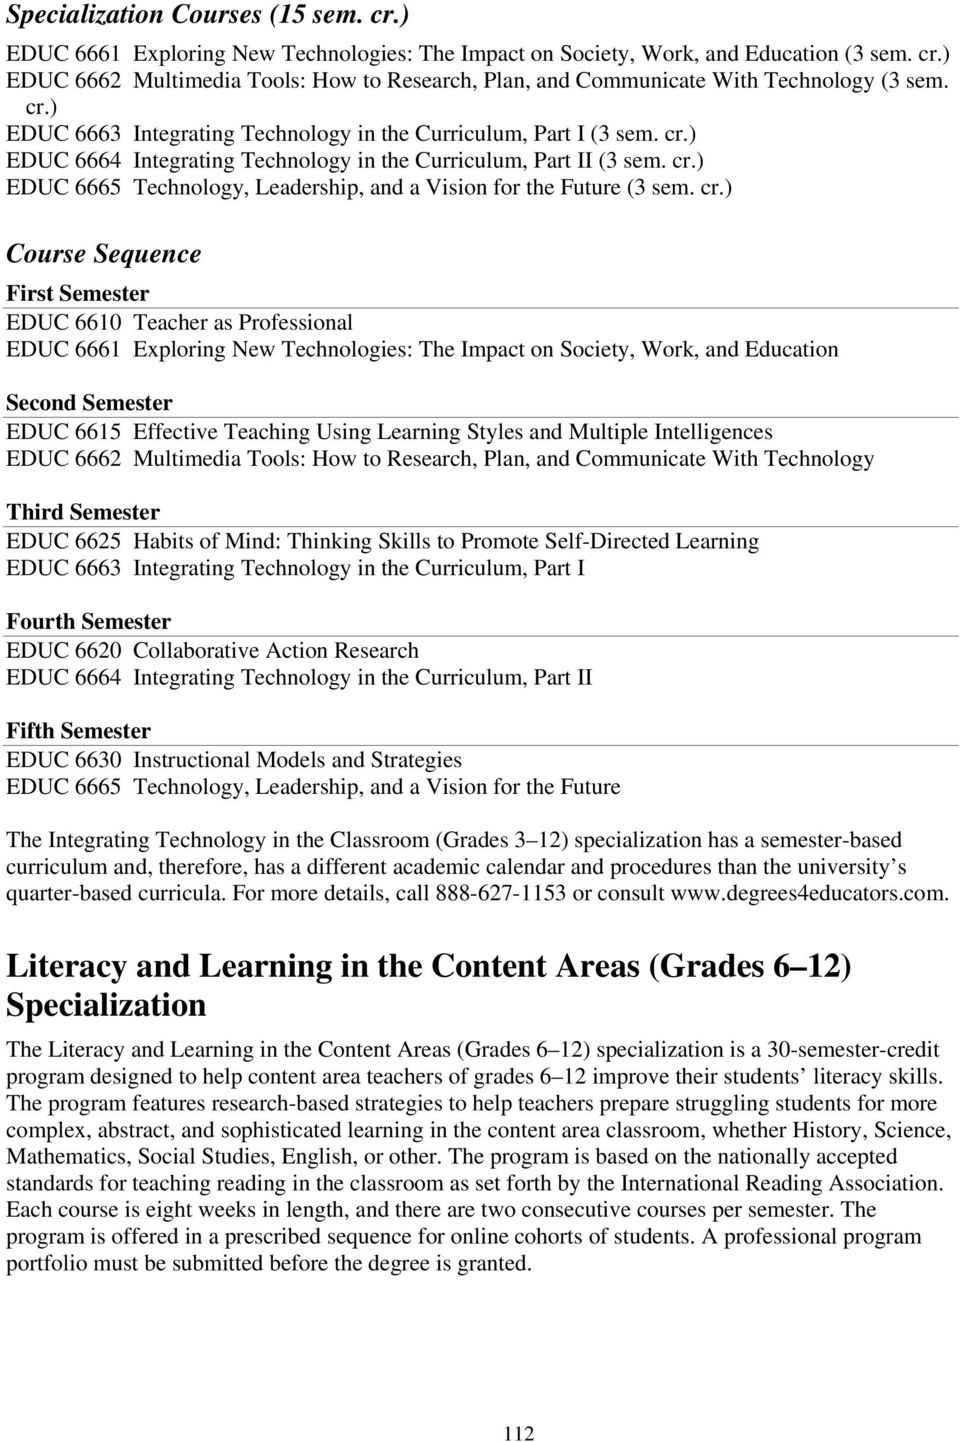 cr.) Course Sequence First Semester EDUC 6610 Teacher as Professional EDUC 6661 Exploring New Technologies: The Impact on Society, Work, and Education Second Semester EDUC 6615 Effective Teaching